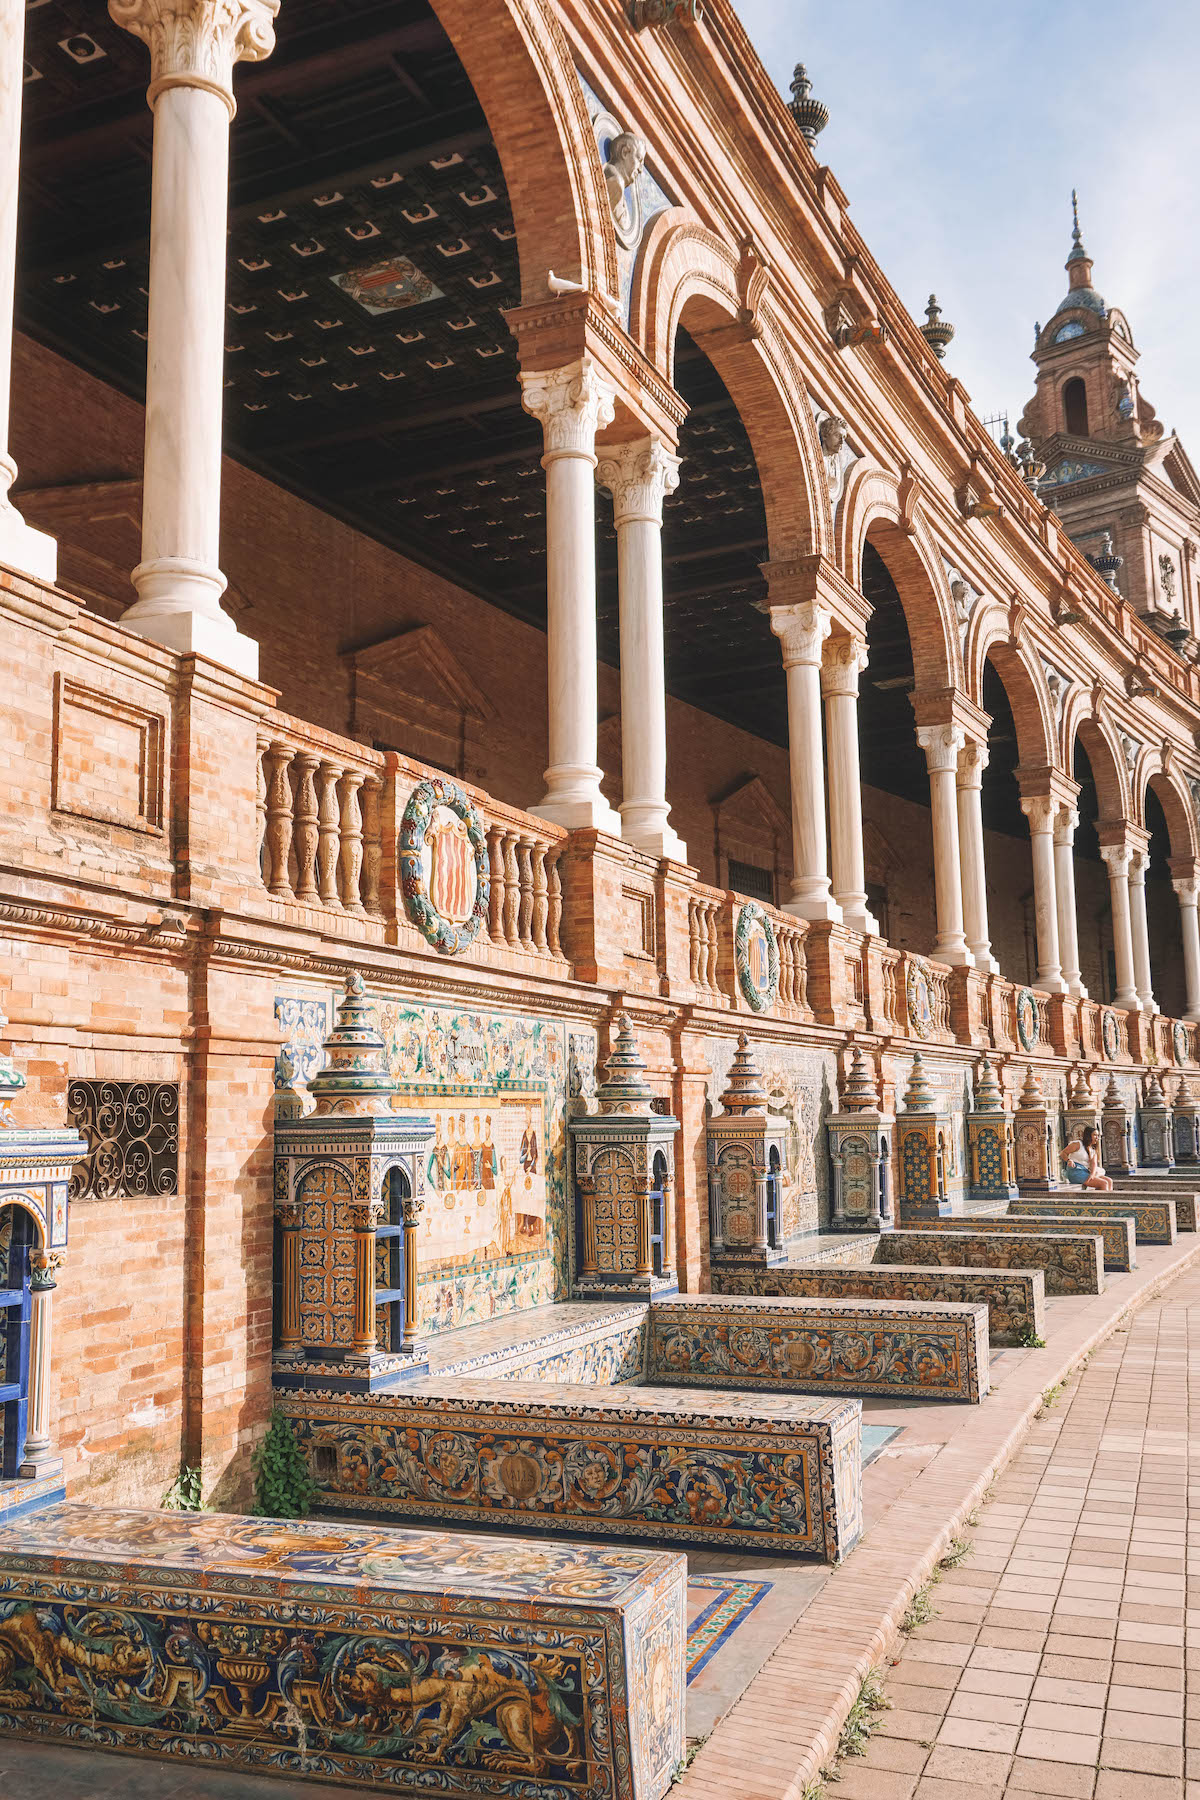 A row of tiled benches along the edge of the Plaza de Espana in Seville, Spain.